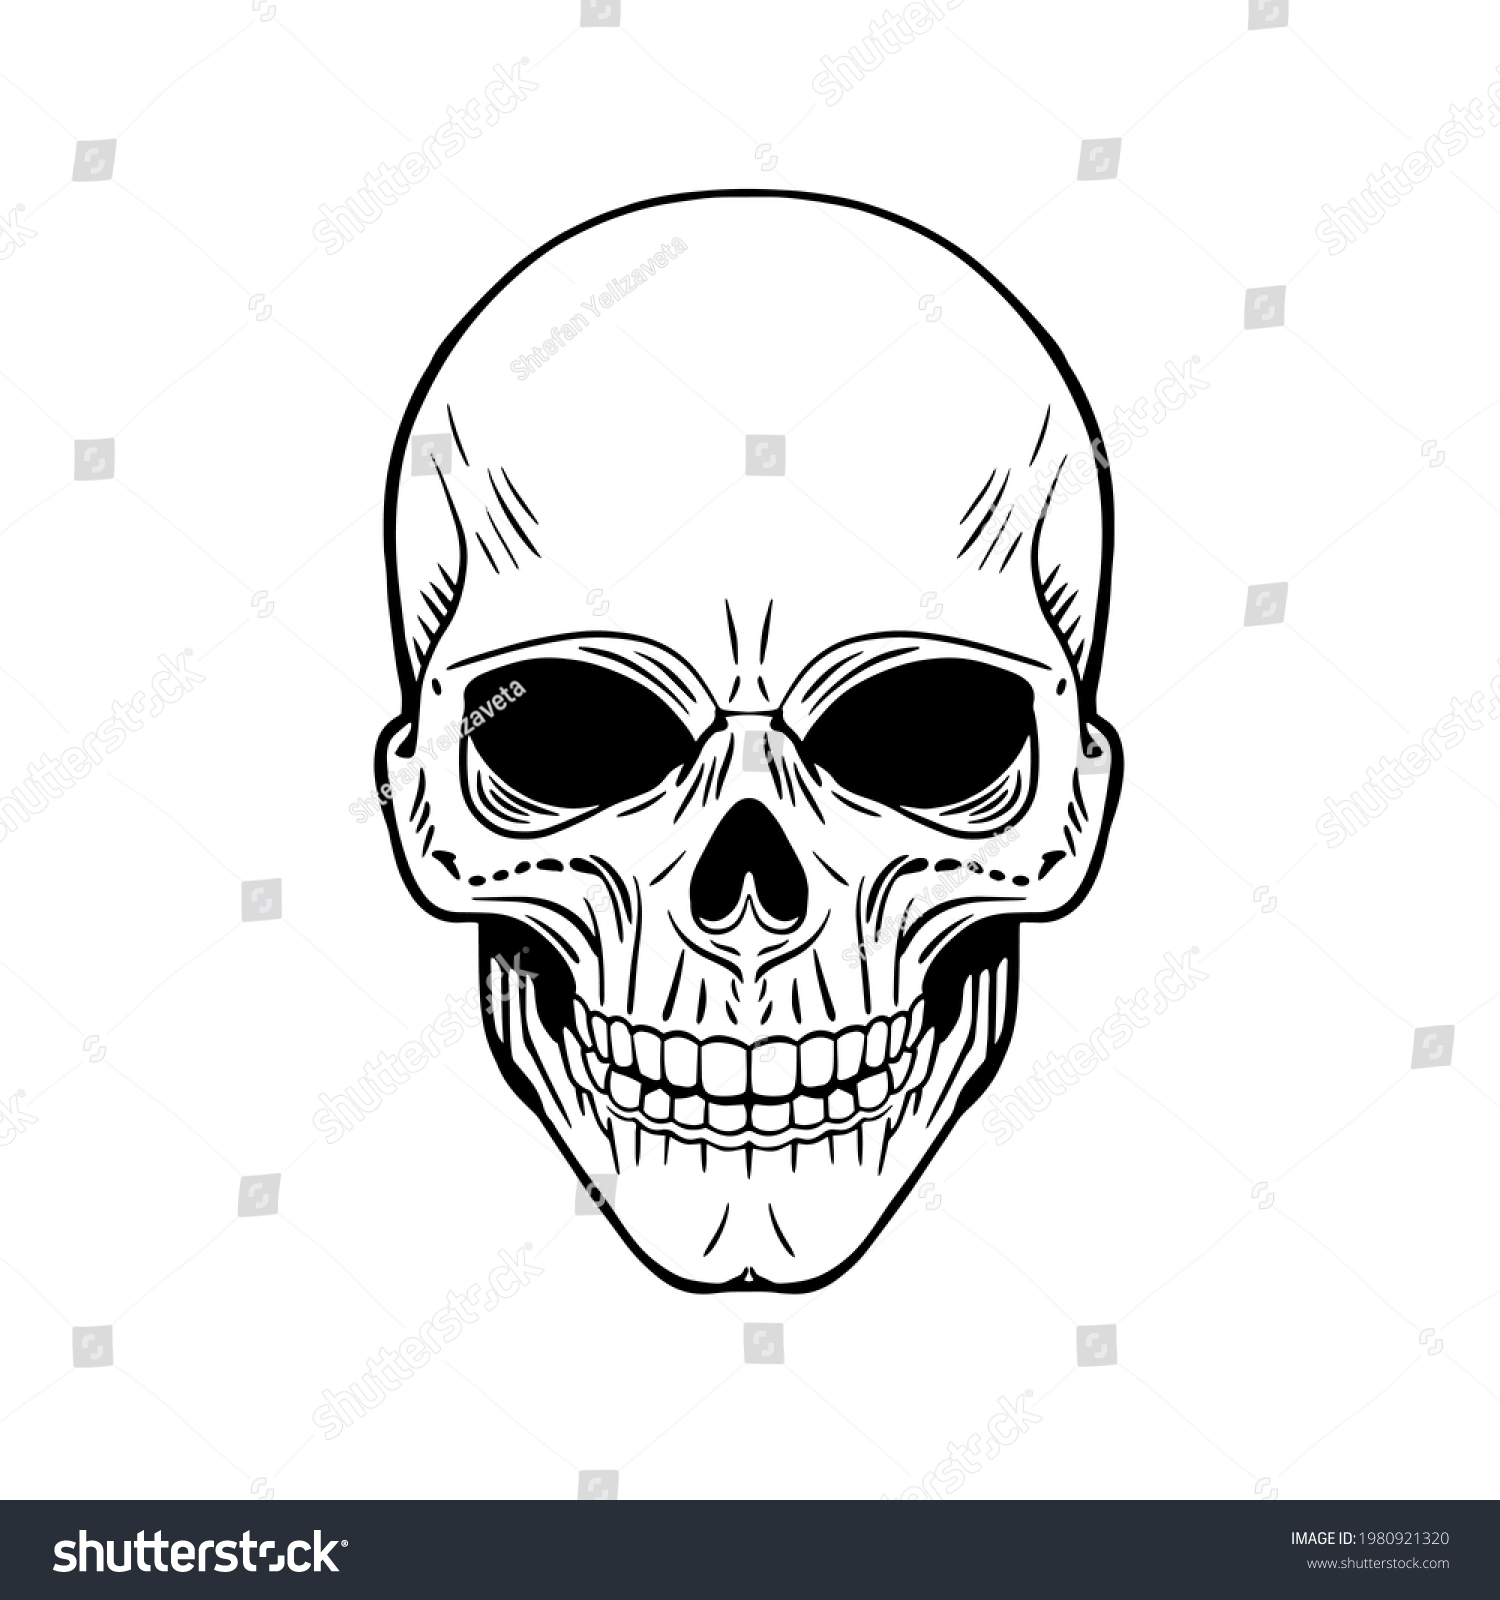 SVG of Skull. The skeleton of a stake. Dead . Clipart vector illustration. Vinyl cutting and printing svg